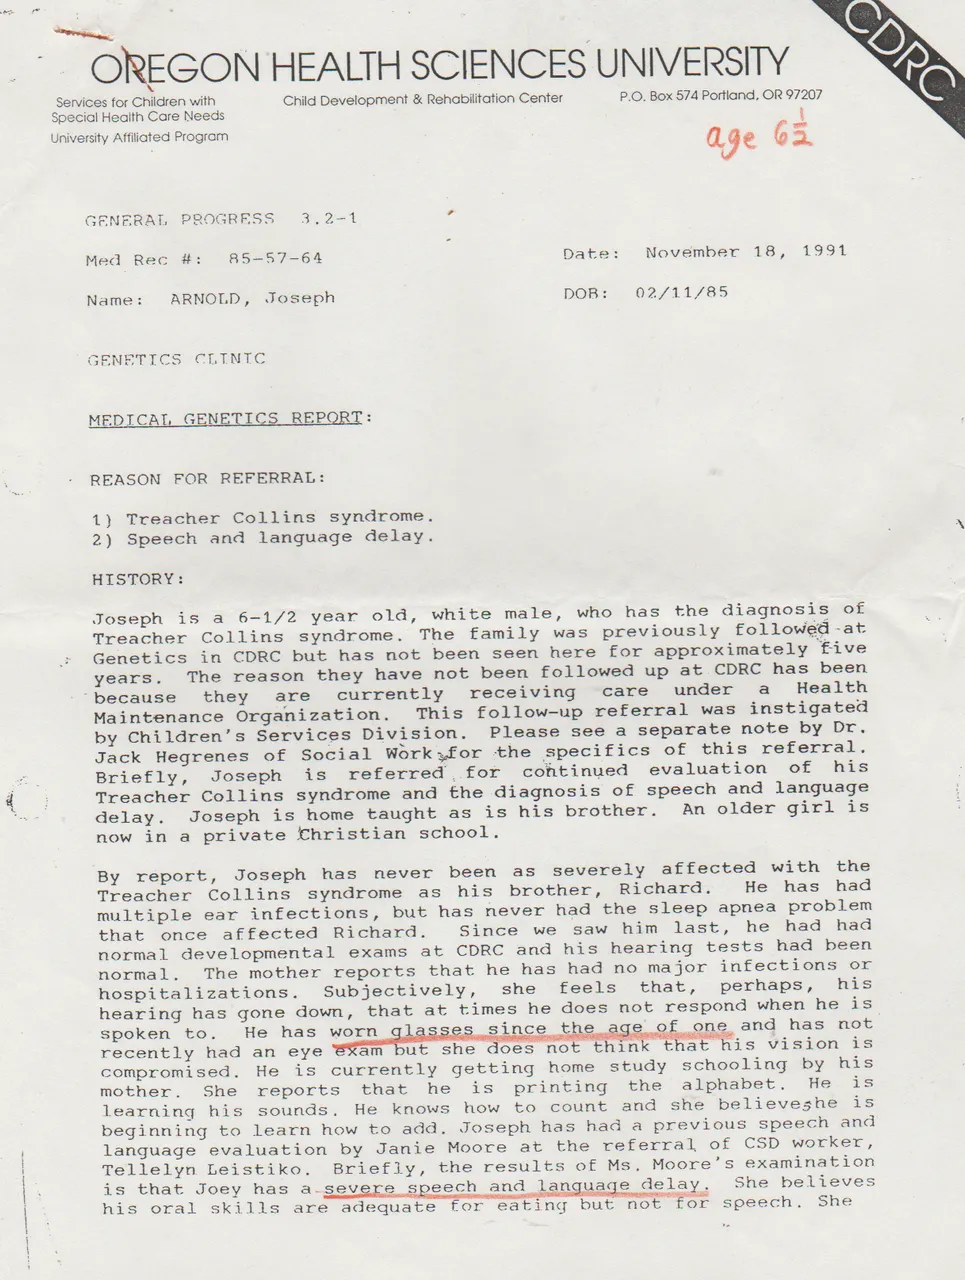 1991-11-18 - Monday - Evaluation of Joey Arnold by some MDs - Oregon Health Sciences University, Portland, OR - 4pages-1.png